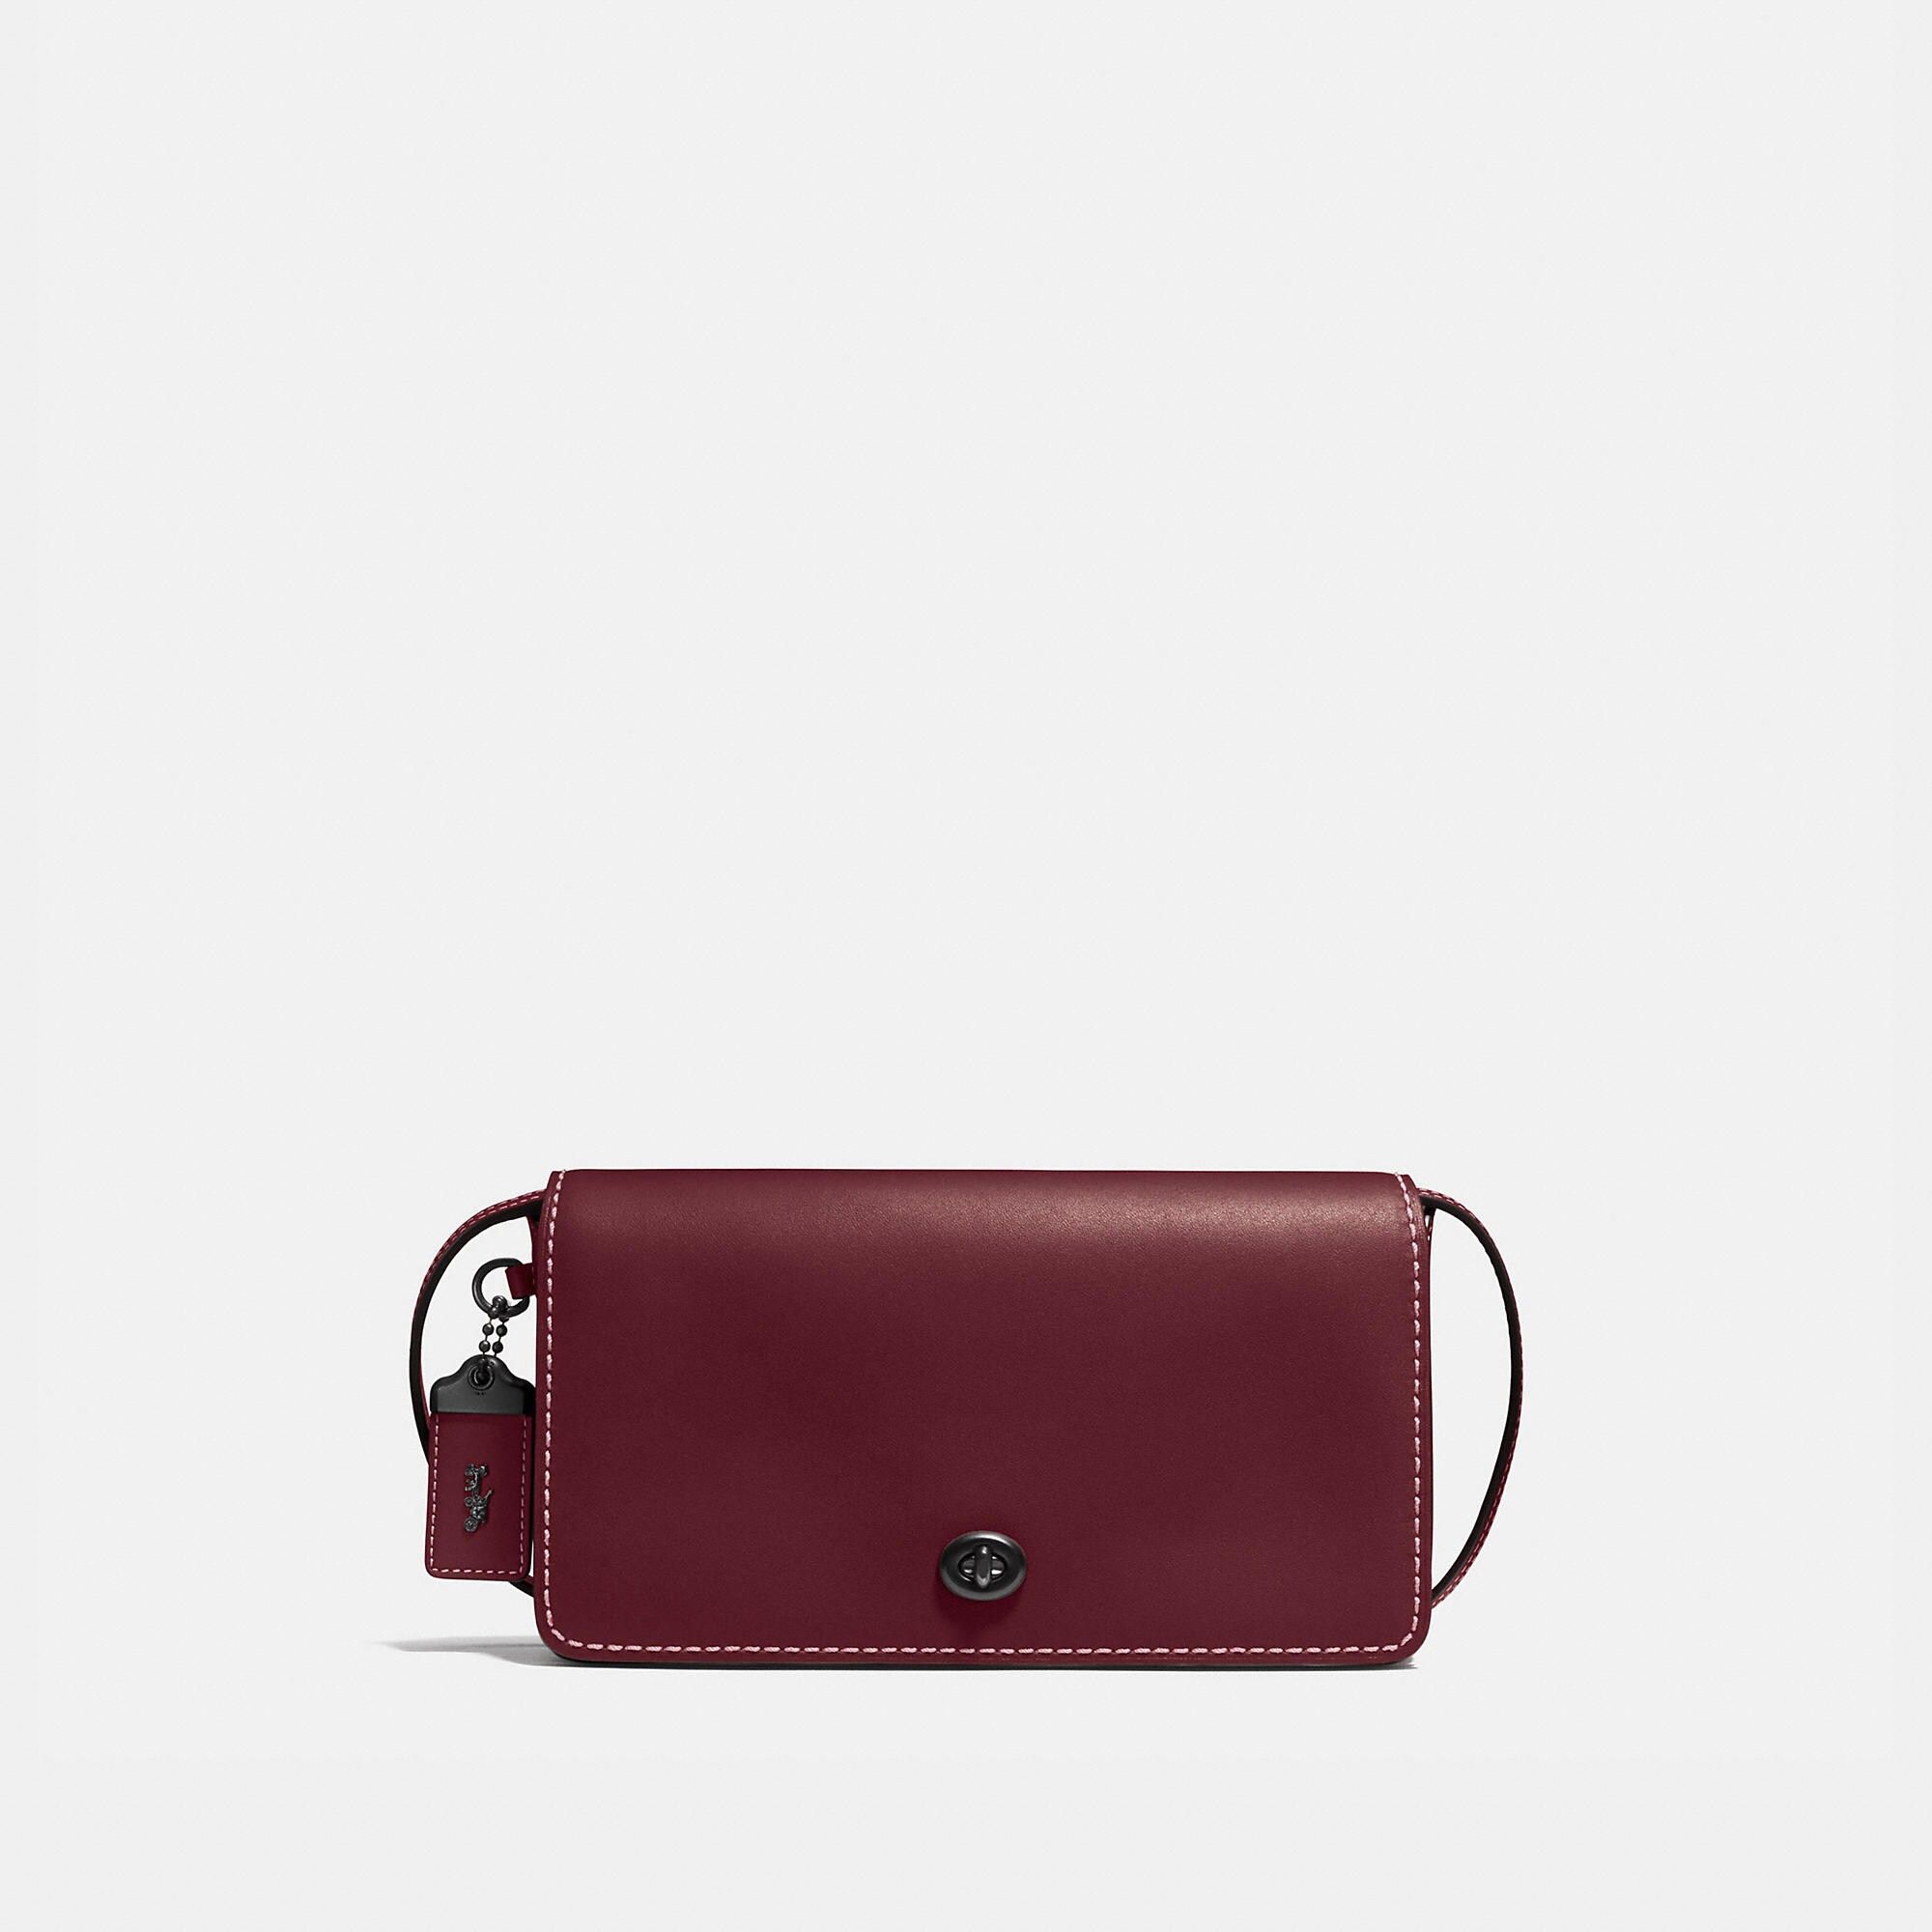 Coach 1941 Dinky Crossbody In Glovetanned Leather | Coach (US)